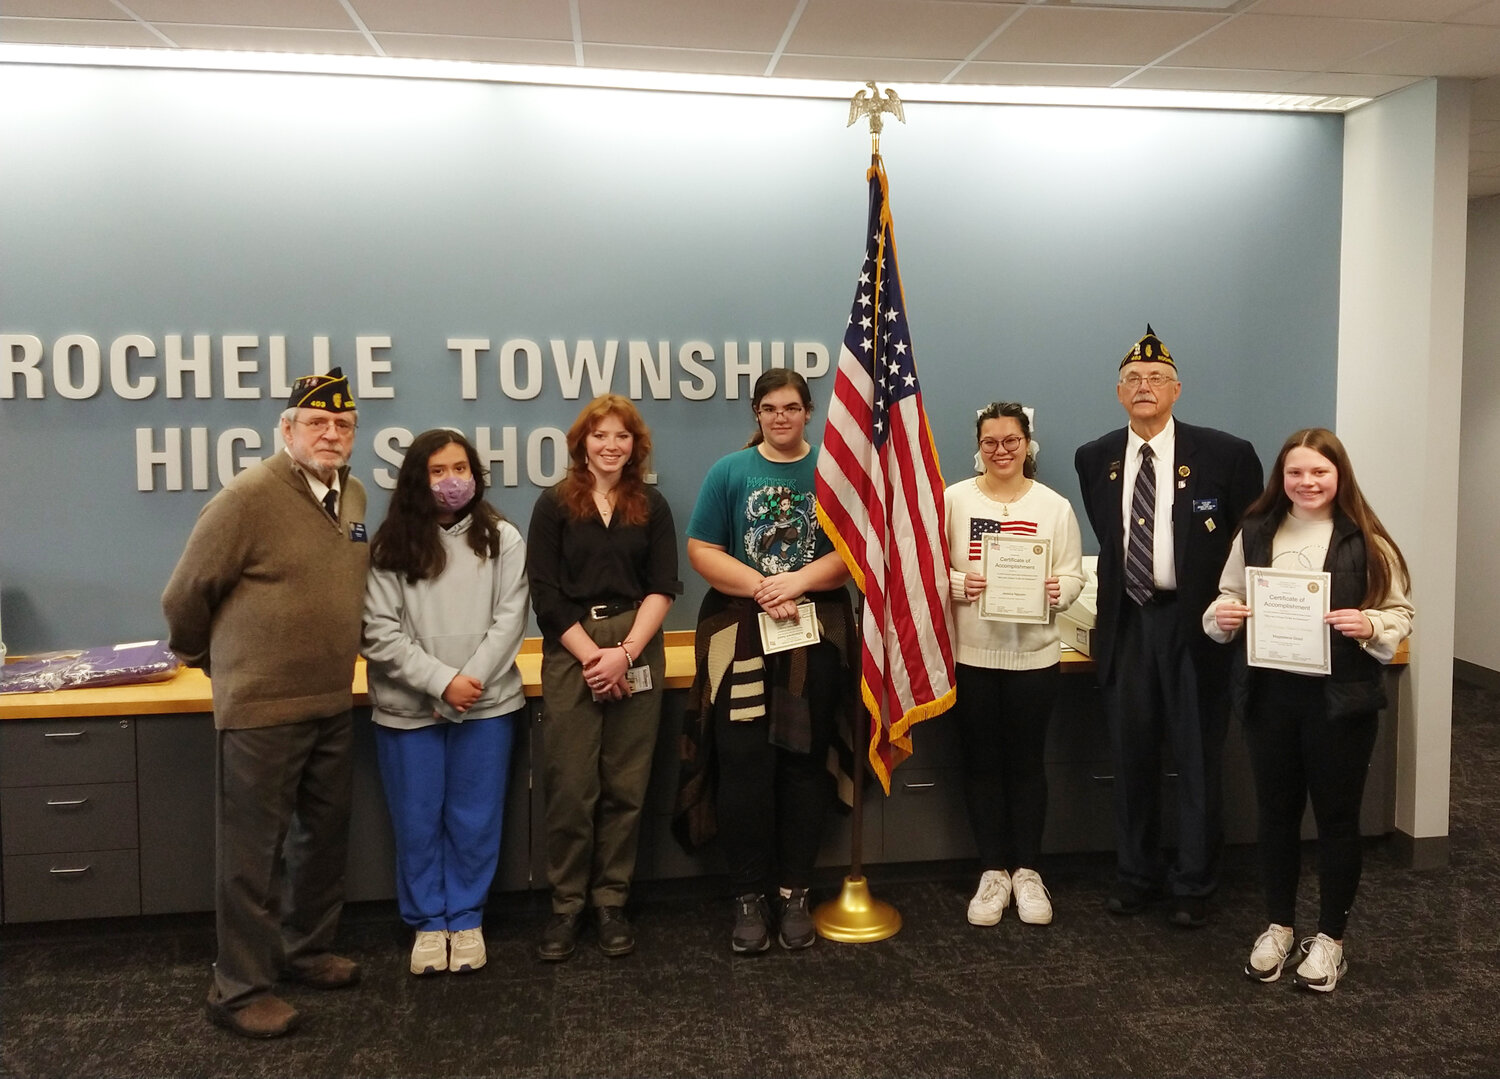 Rochelle Township High School winners from left to right: John Gruben (commander, American Legion Post 403), Brizuela Xitlali (honorable mention), Kyra Bivins (honorable mention), Kathryn Groves (second place, Class II), Jessica Nguyen (first place, Class 1), Steve Korth (adjutant, American Legion Post 403) and Magdalene Good (first place, Class II). Not shown: Aiden Ramsey, second place, Class I.